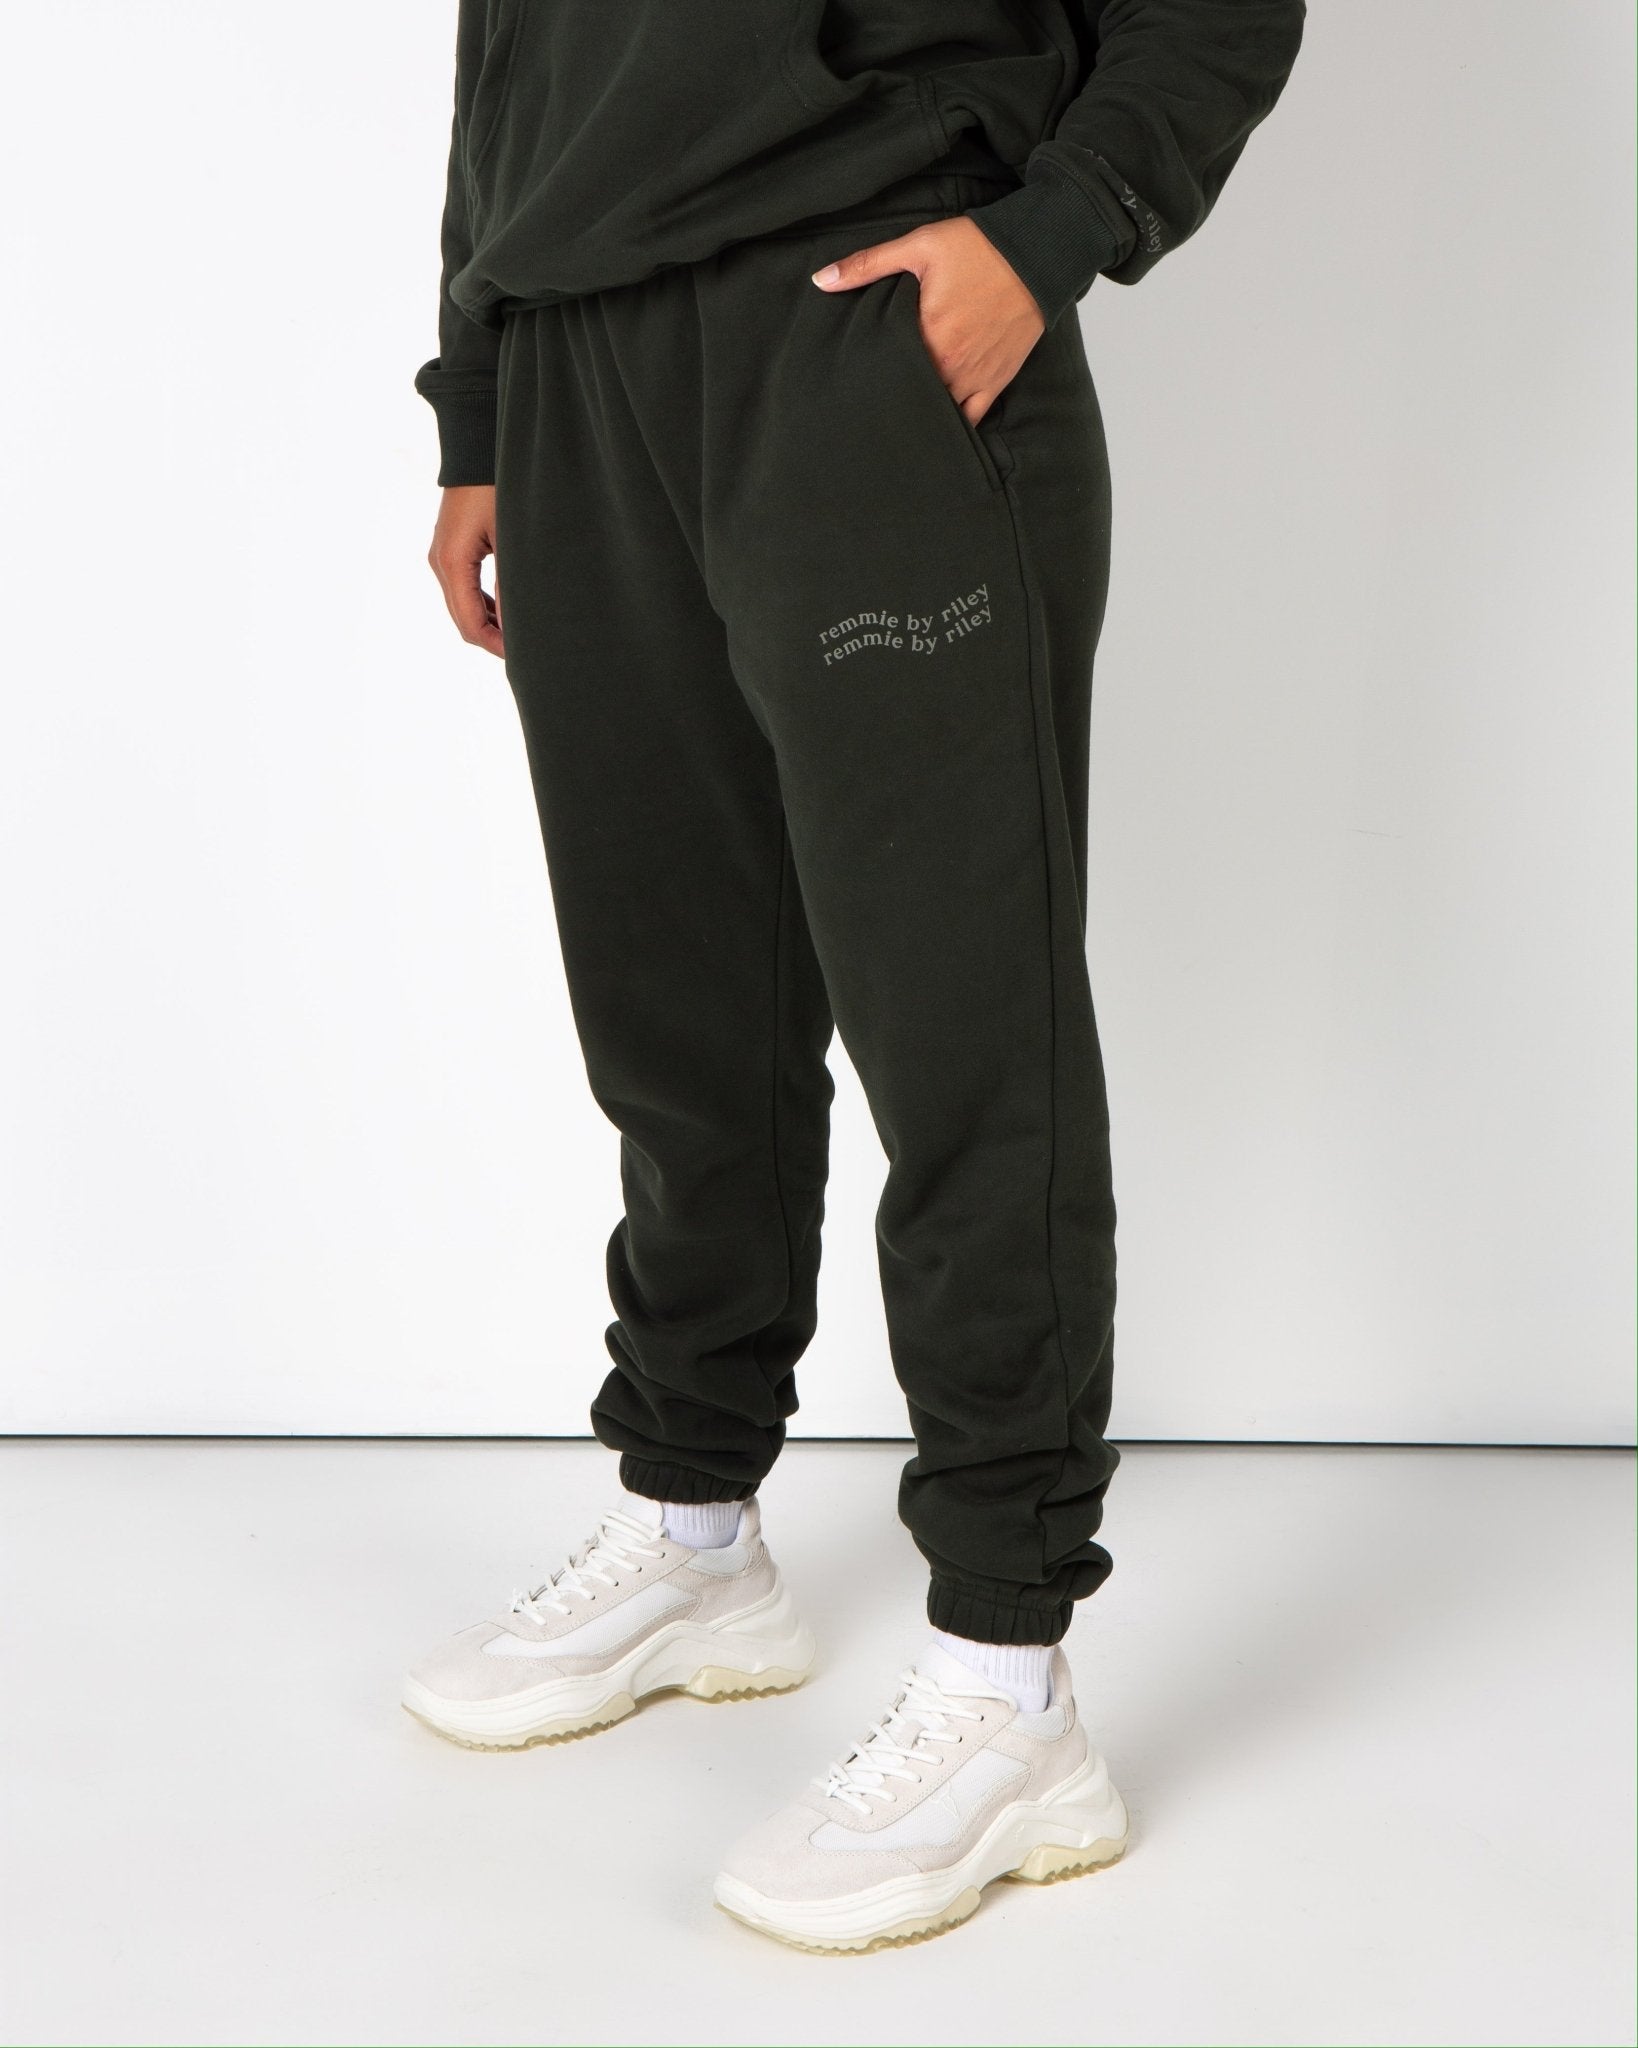 Forest Sweatpants - Remmie By Riley